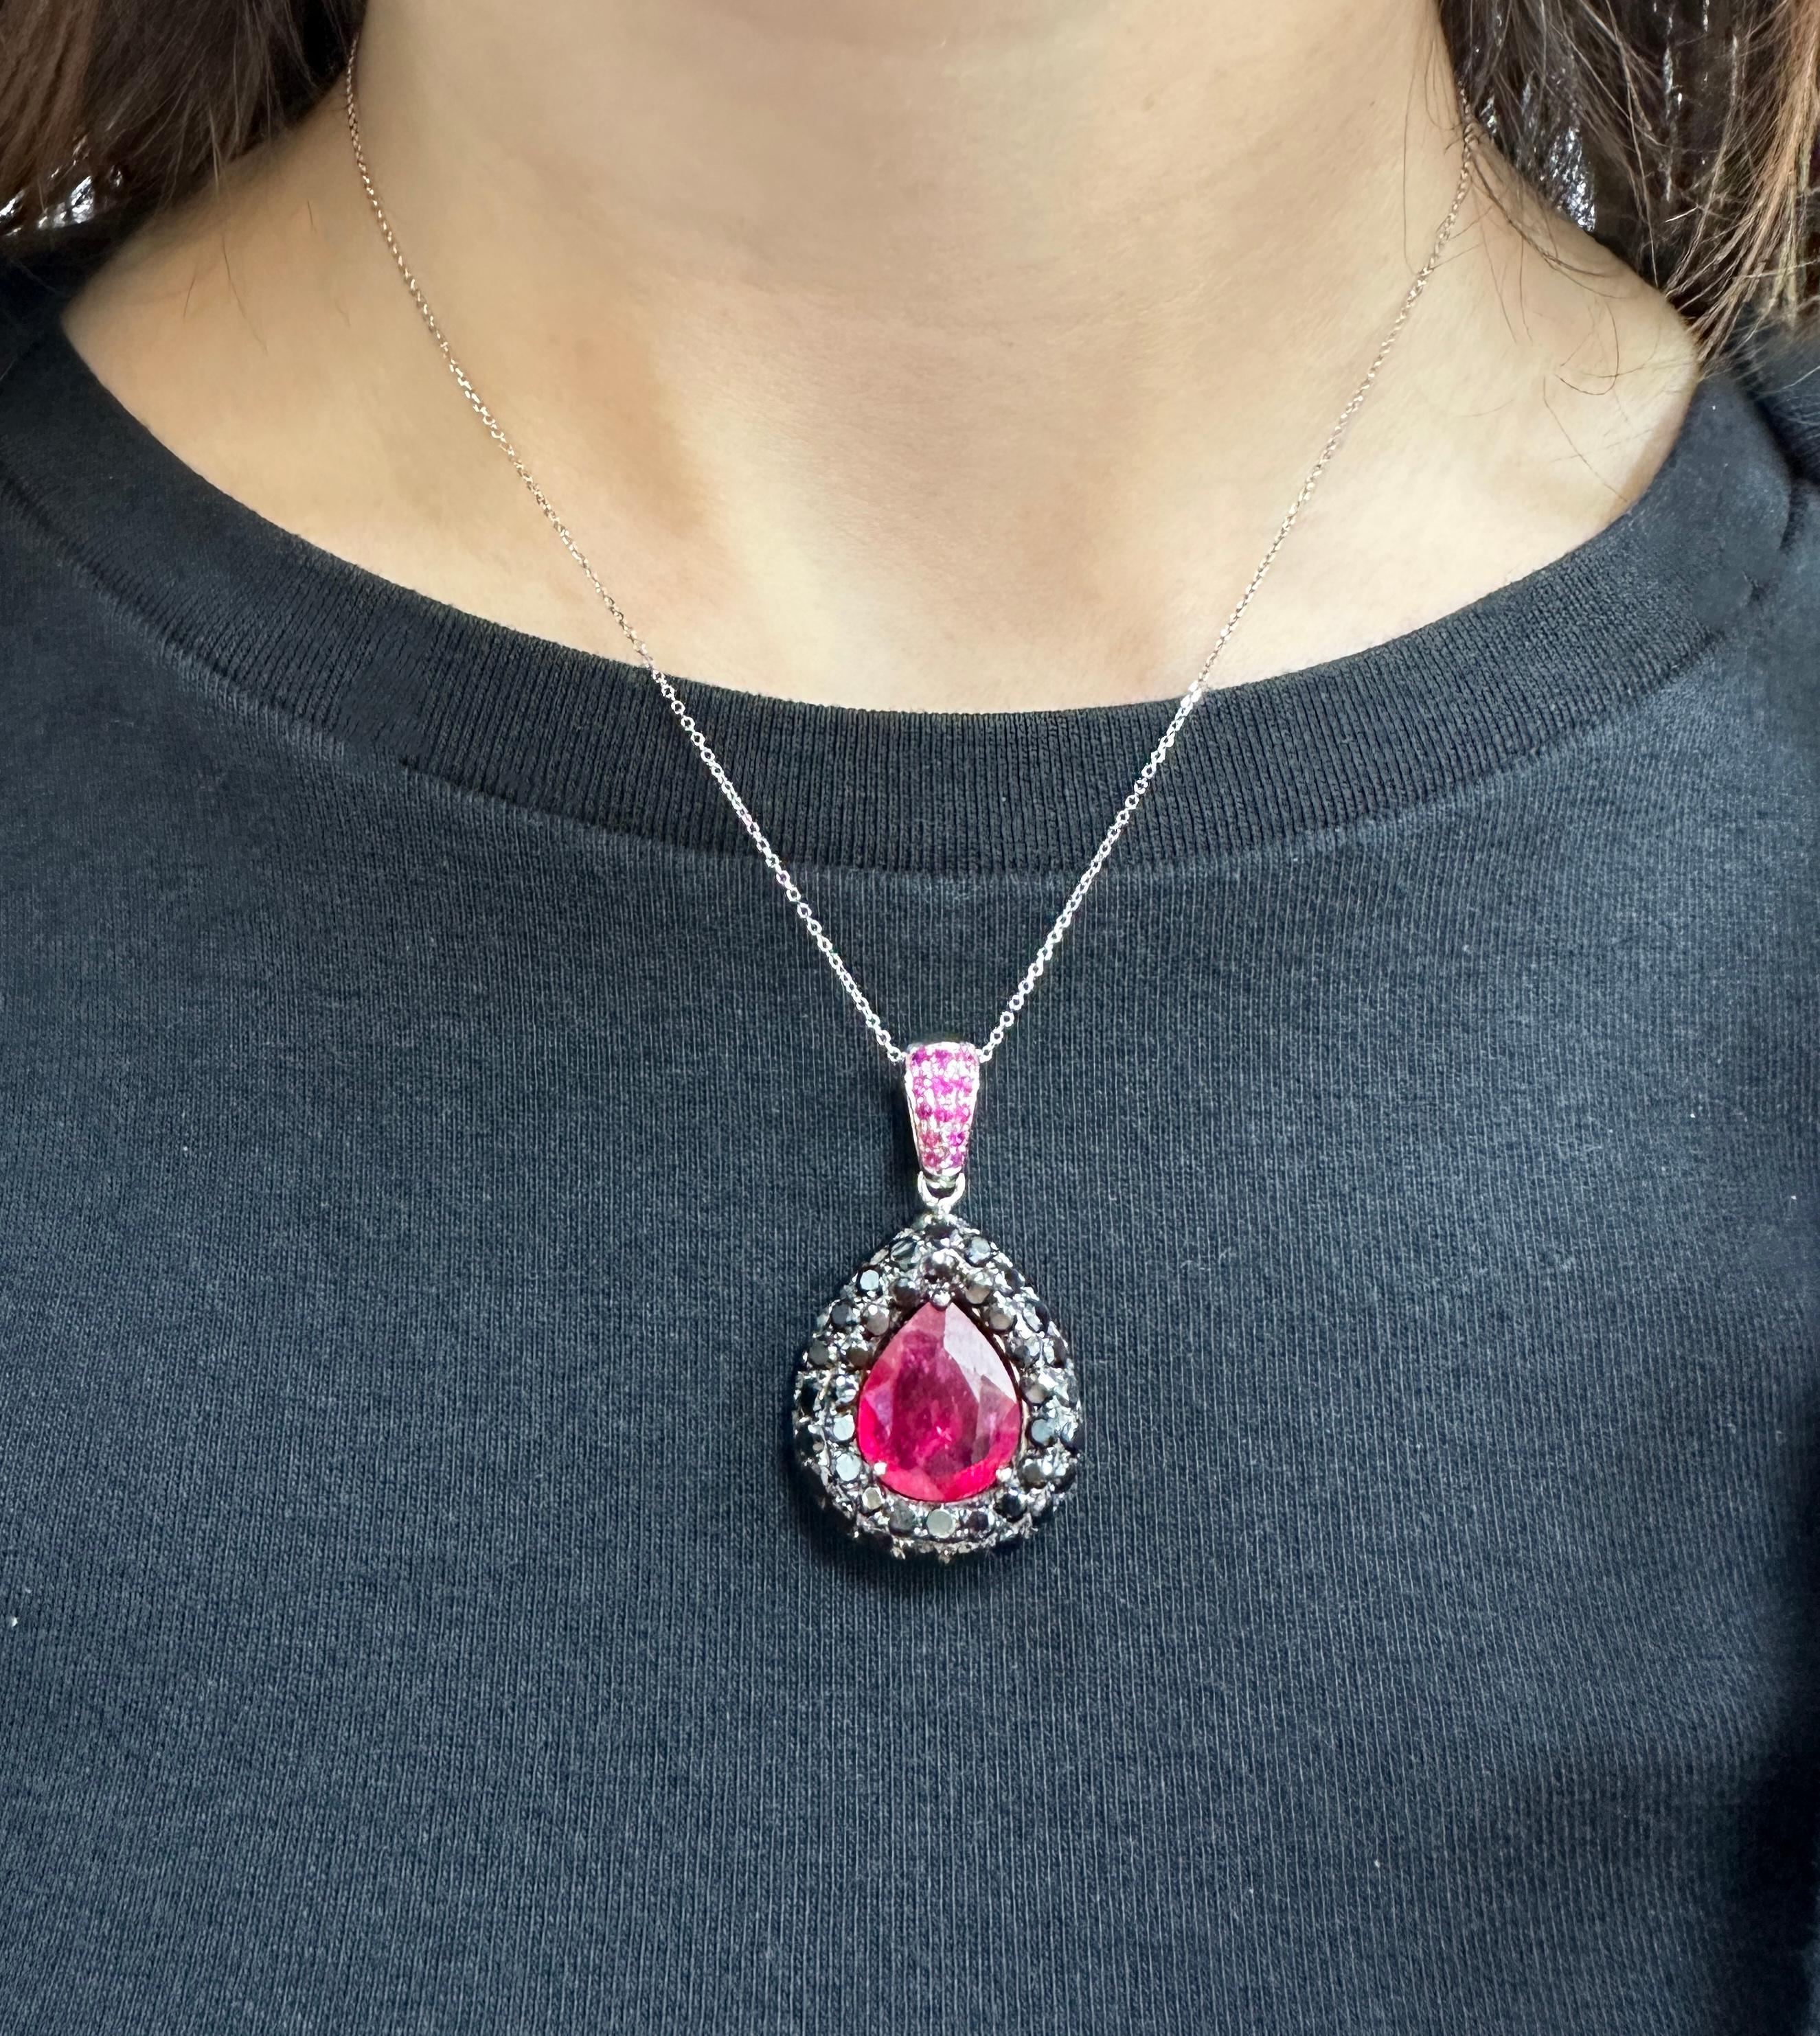 18k Black Diamond and African Ruby Pendant with 14k Chain Necklace 3